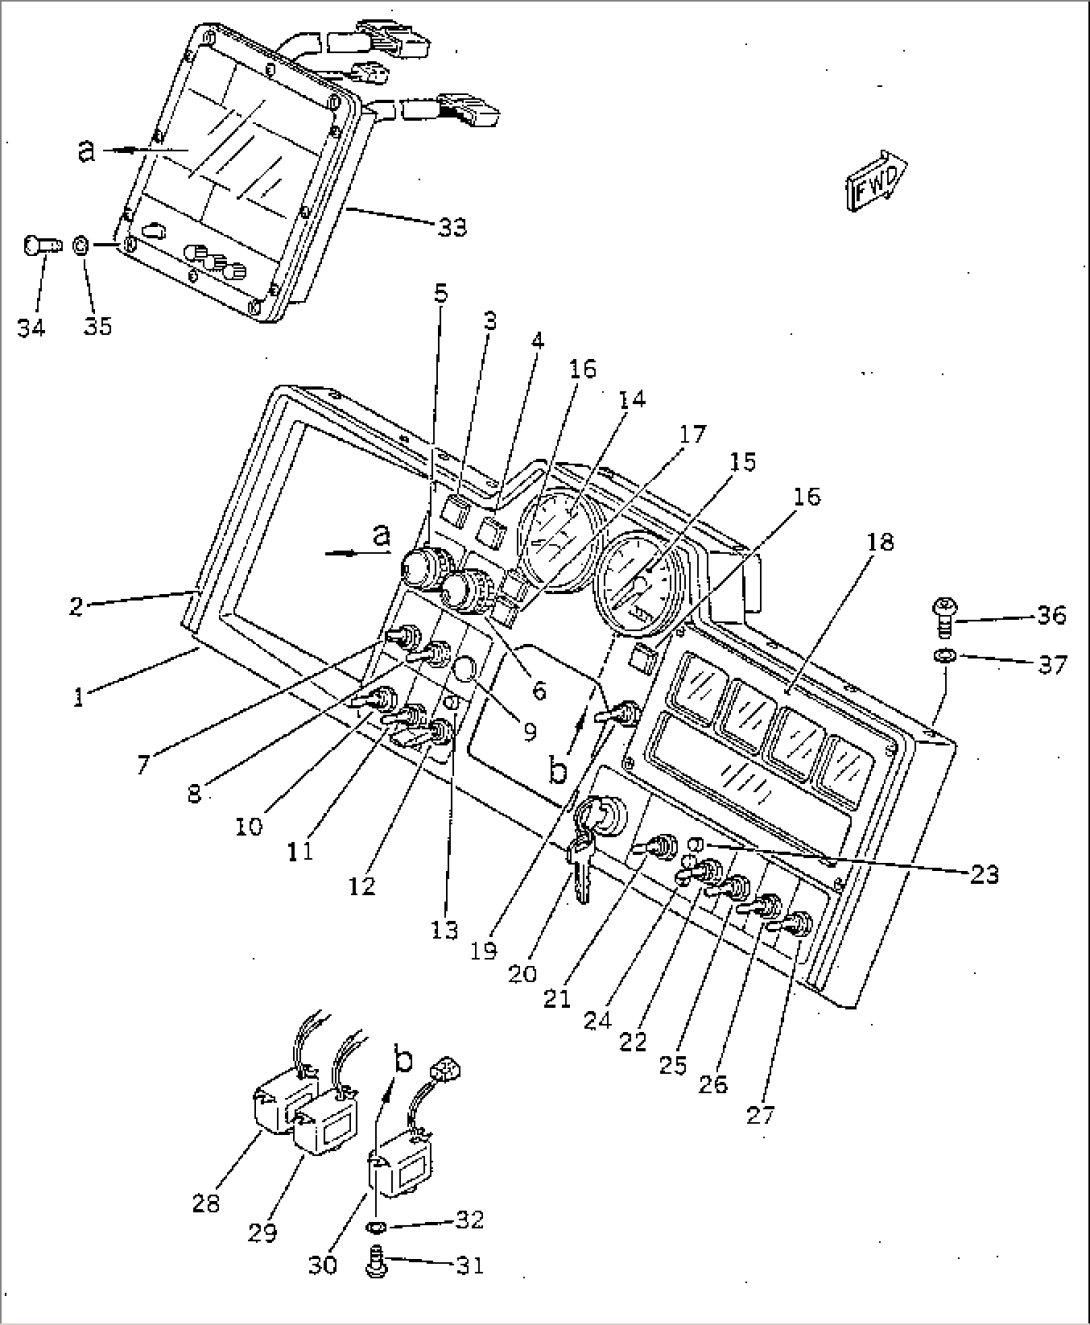 INSTRUMENT PANEL (FRONT) (FOR 3RD WINCH)